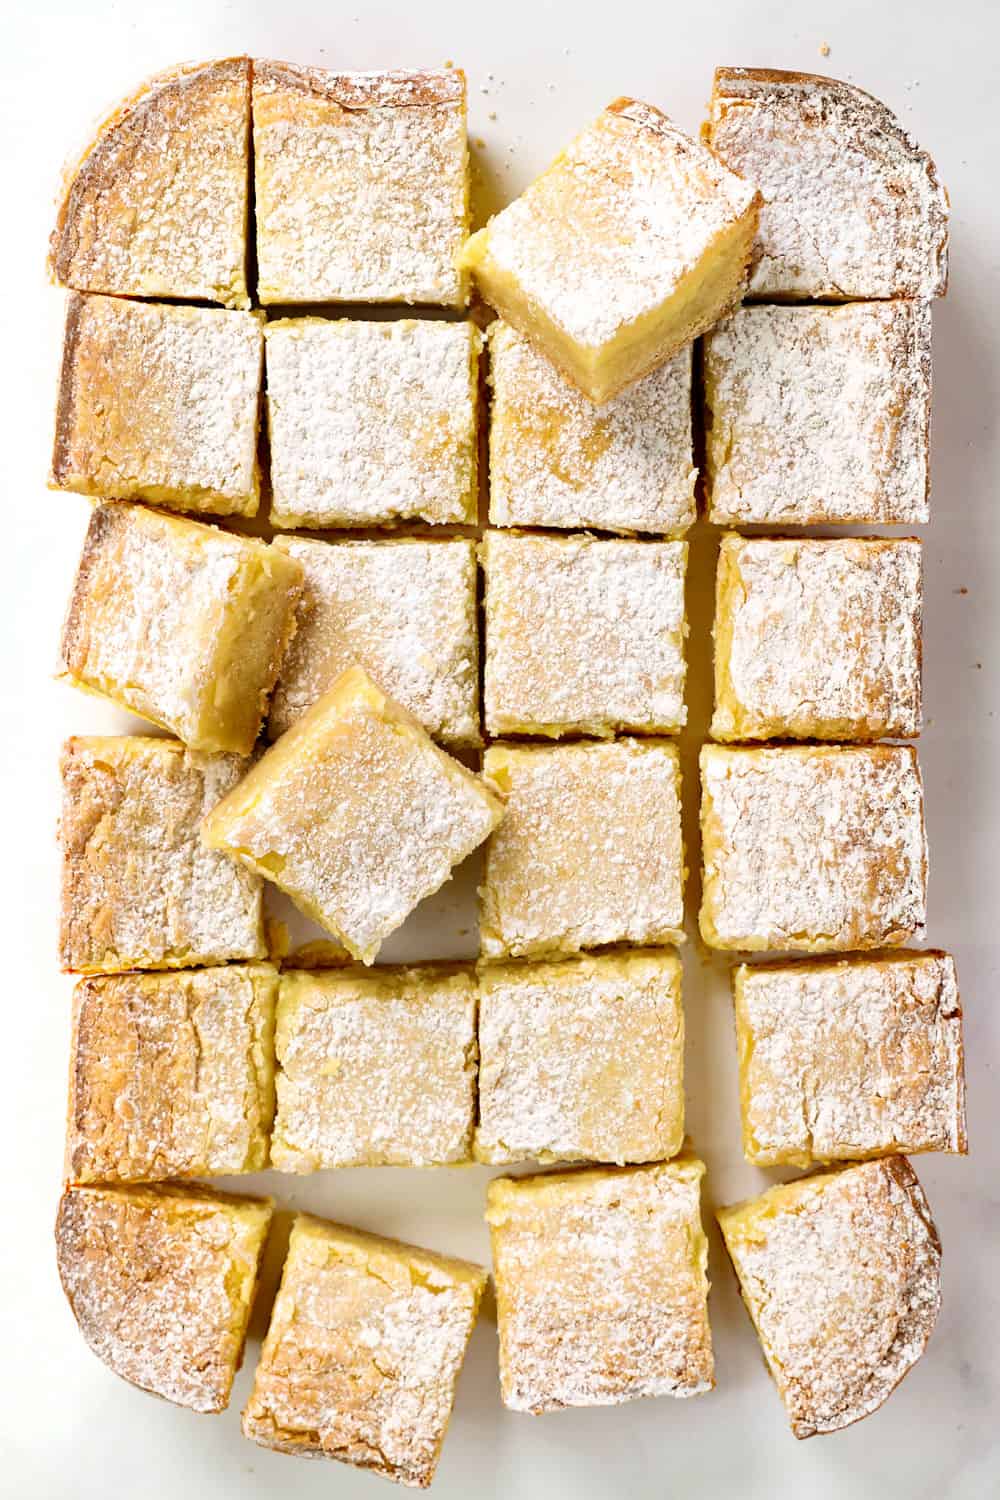 showing how to make Gooey Butter Cake recipe by cutting into squares once cooled